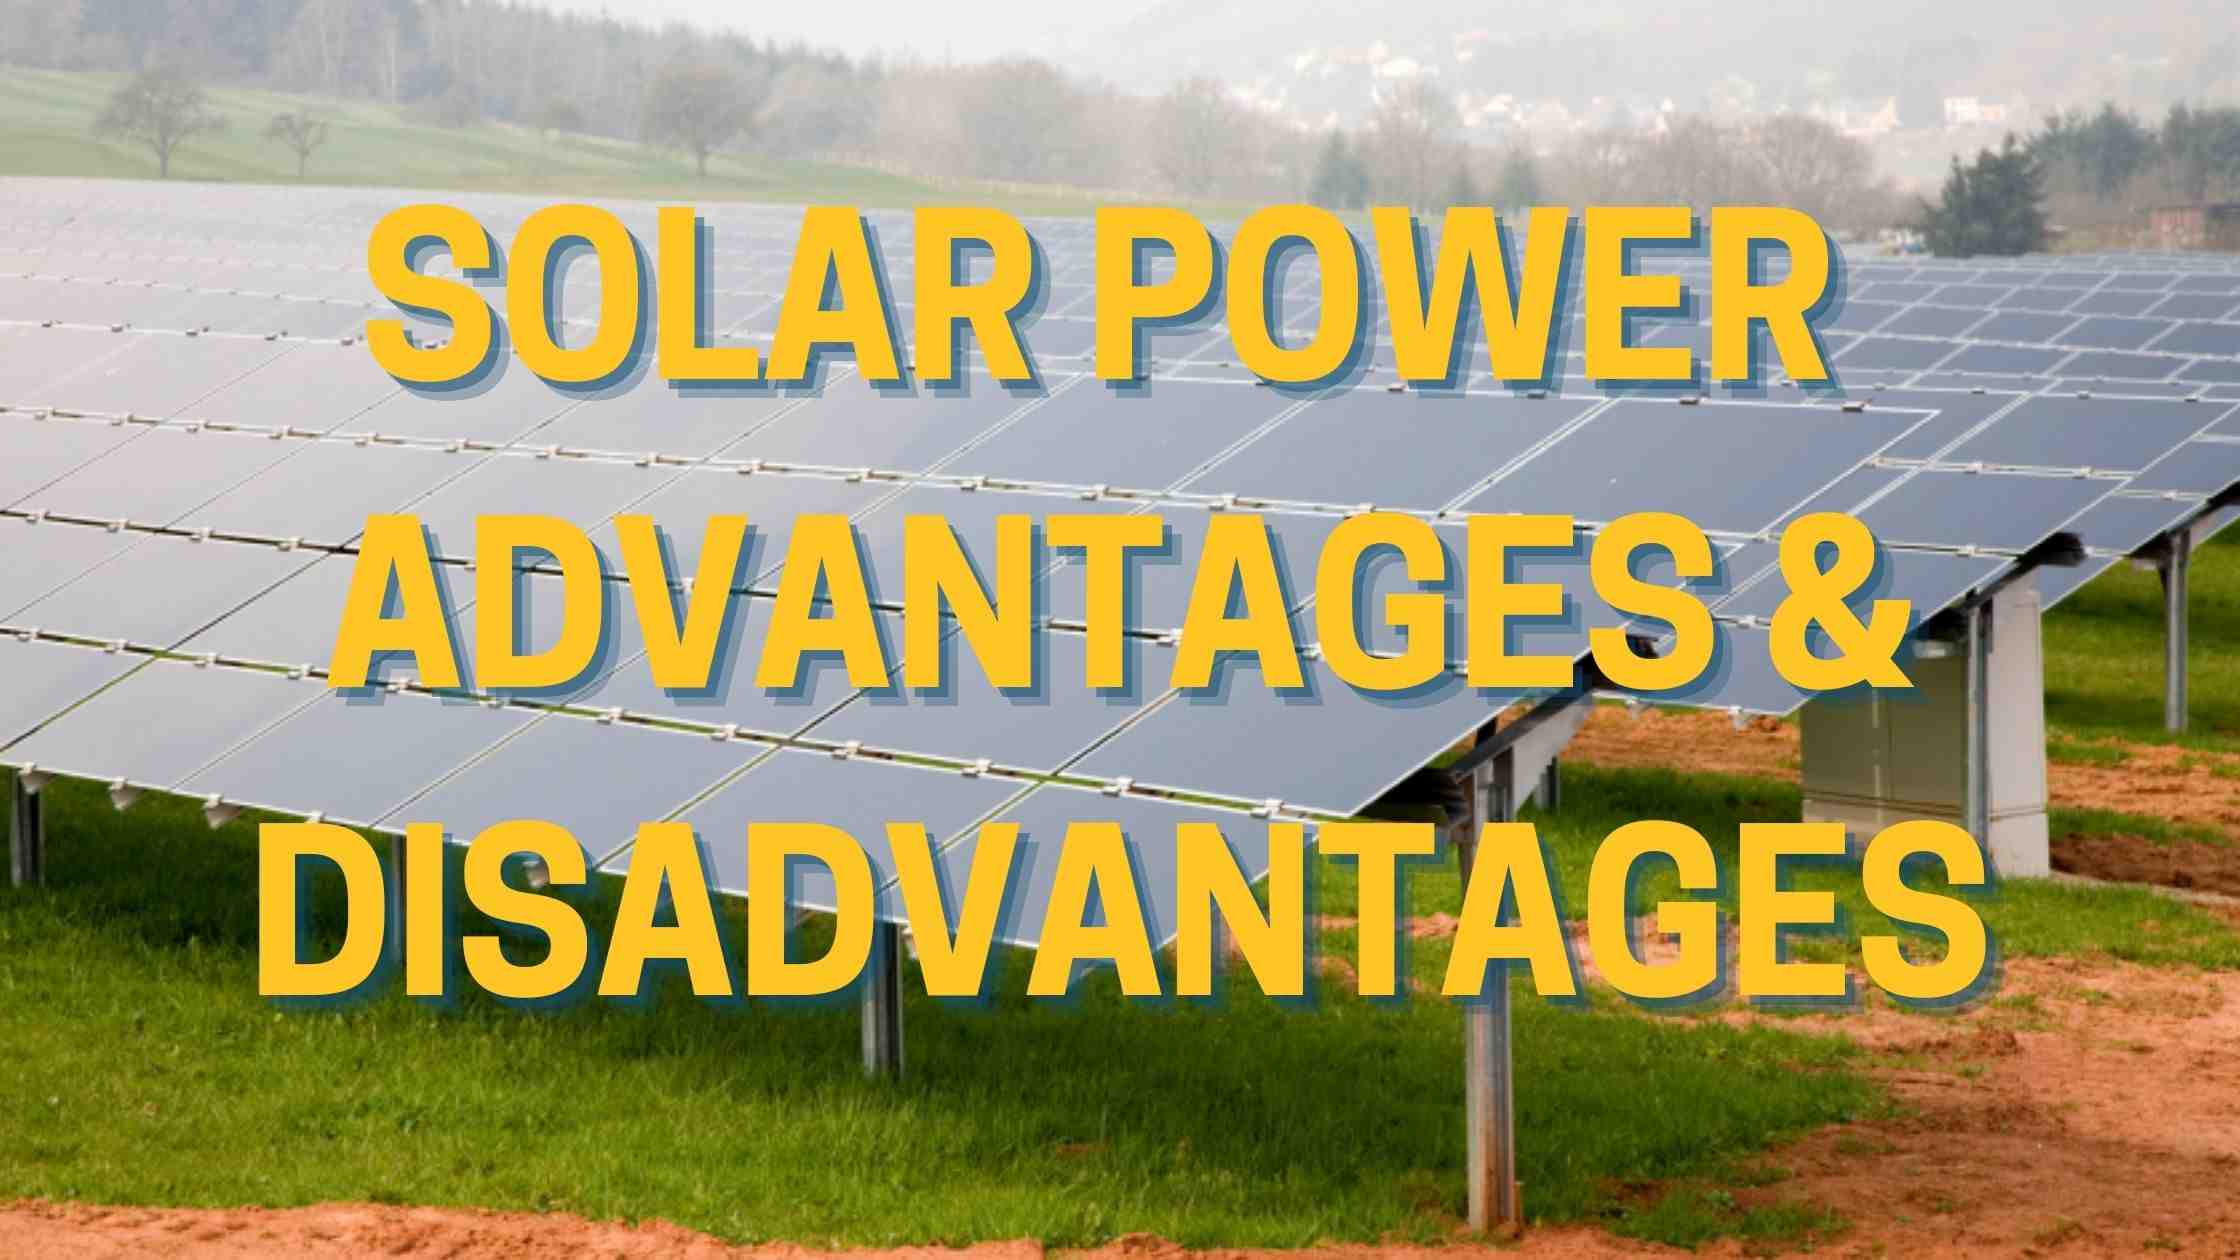 What are 3 pros and 3 cons to solar power?